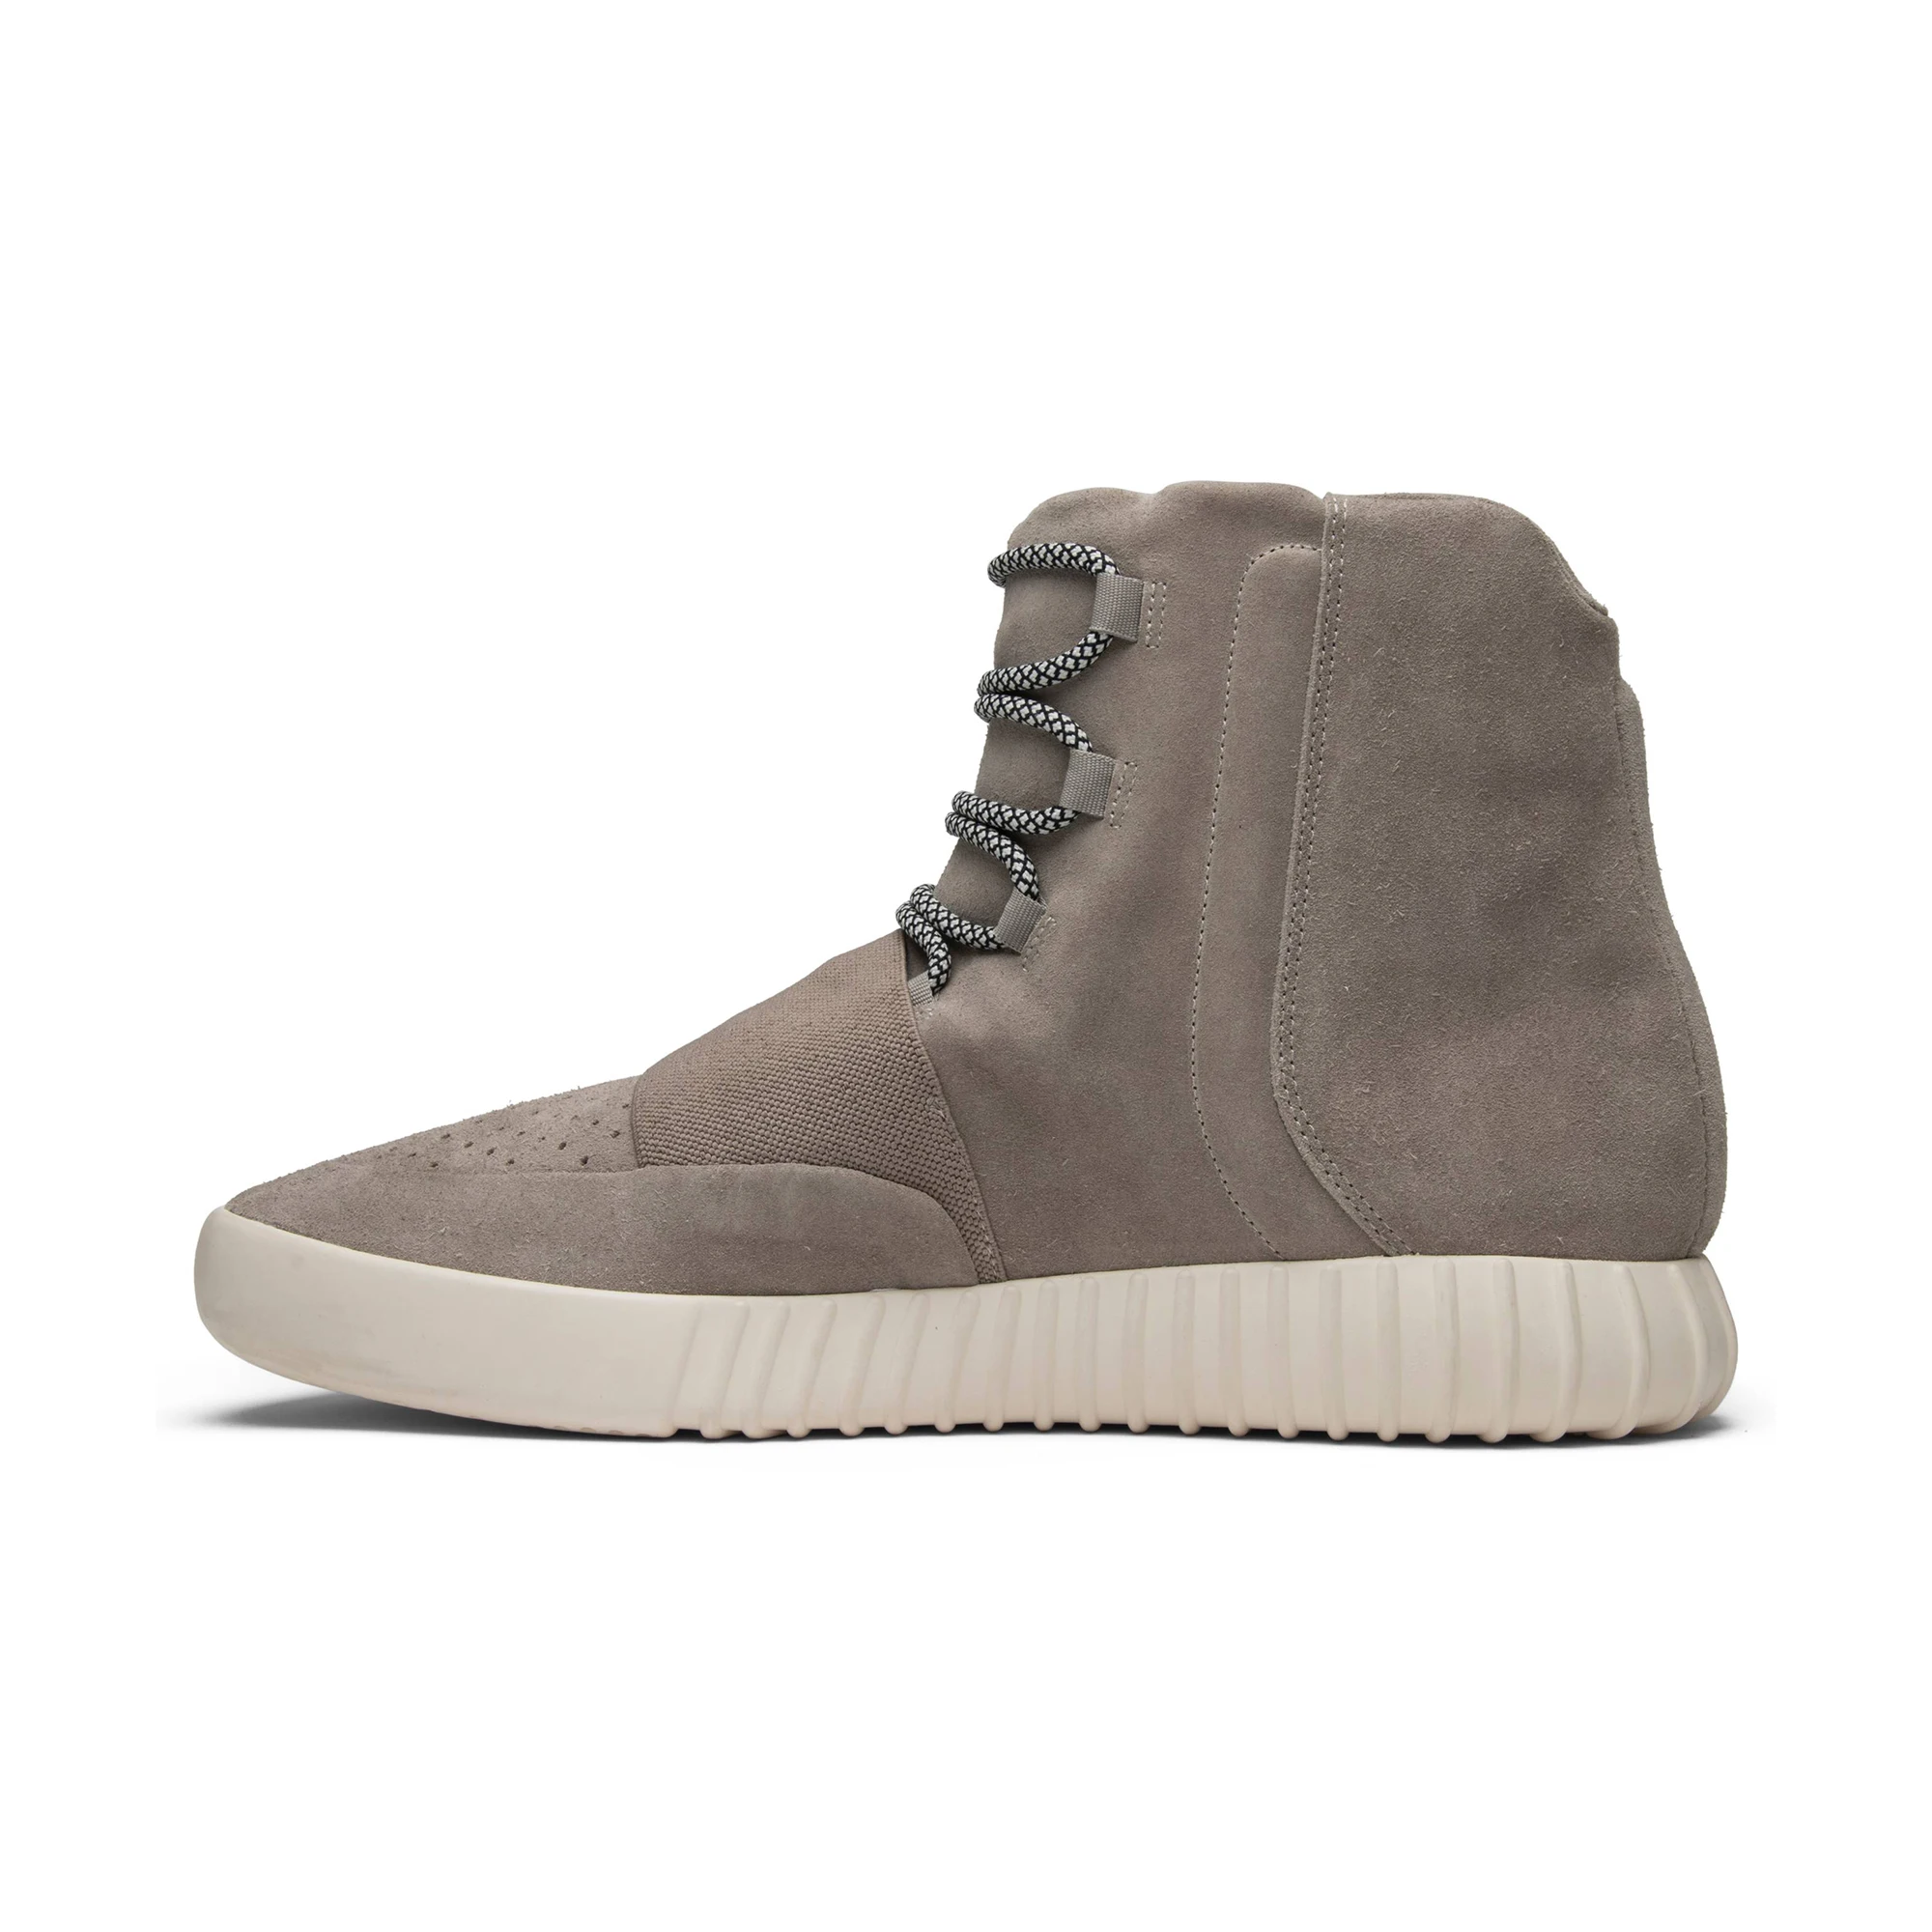 

750 Top Quality Casual Shoes Yeezy 750 Boots Chocolate Triple Black Light Brown Glow Grey Gum